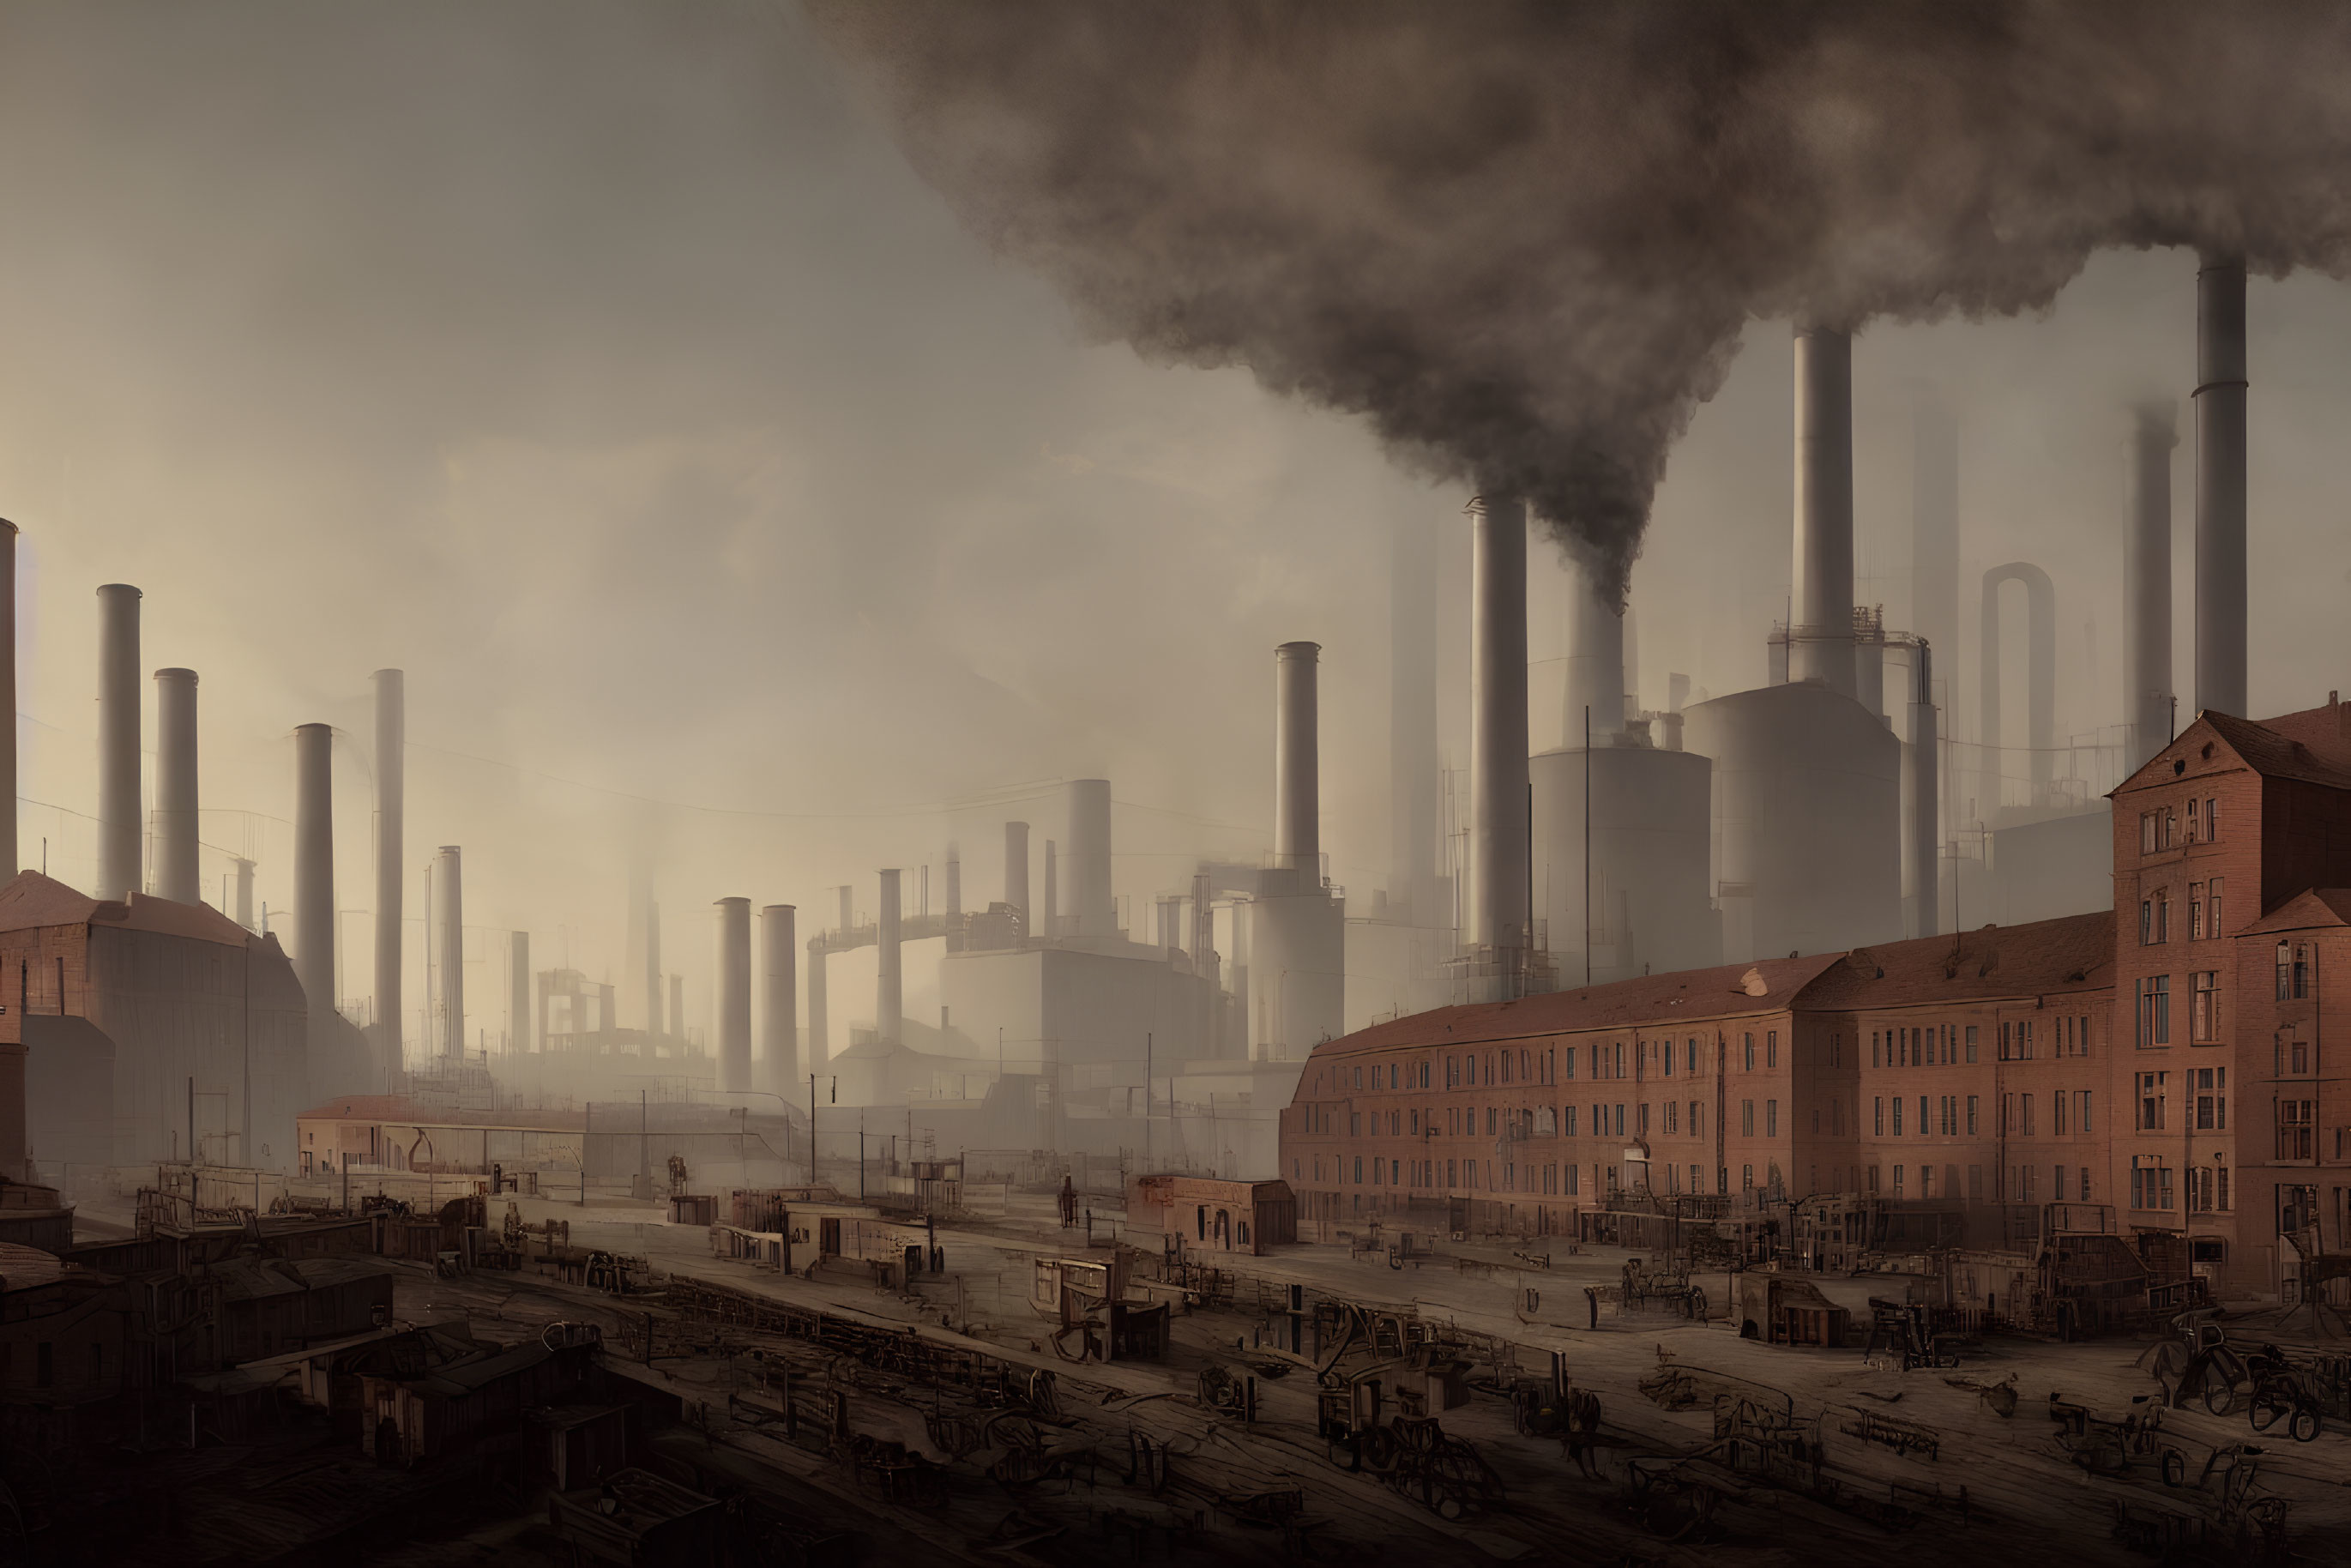 Industrial landscape with smokestacks and hazy sky in city scene.